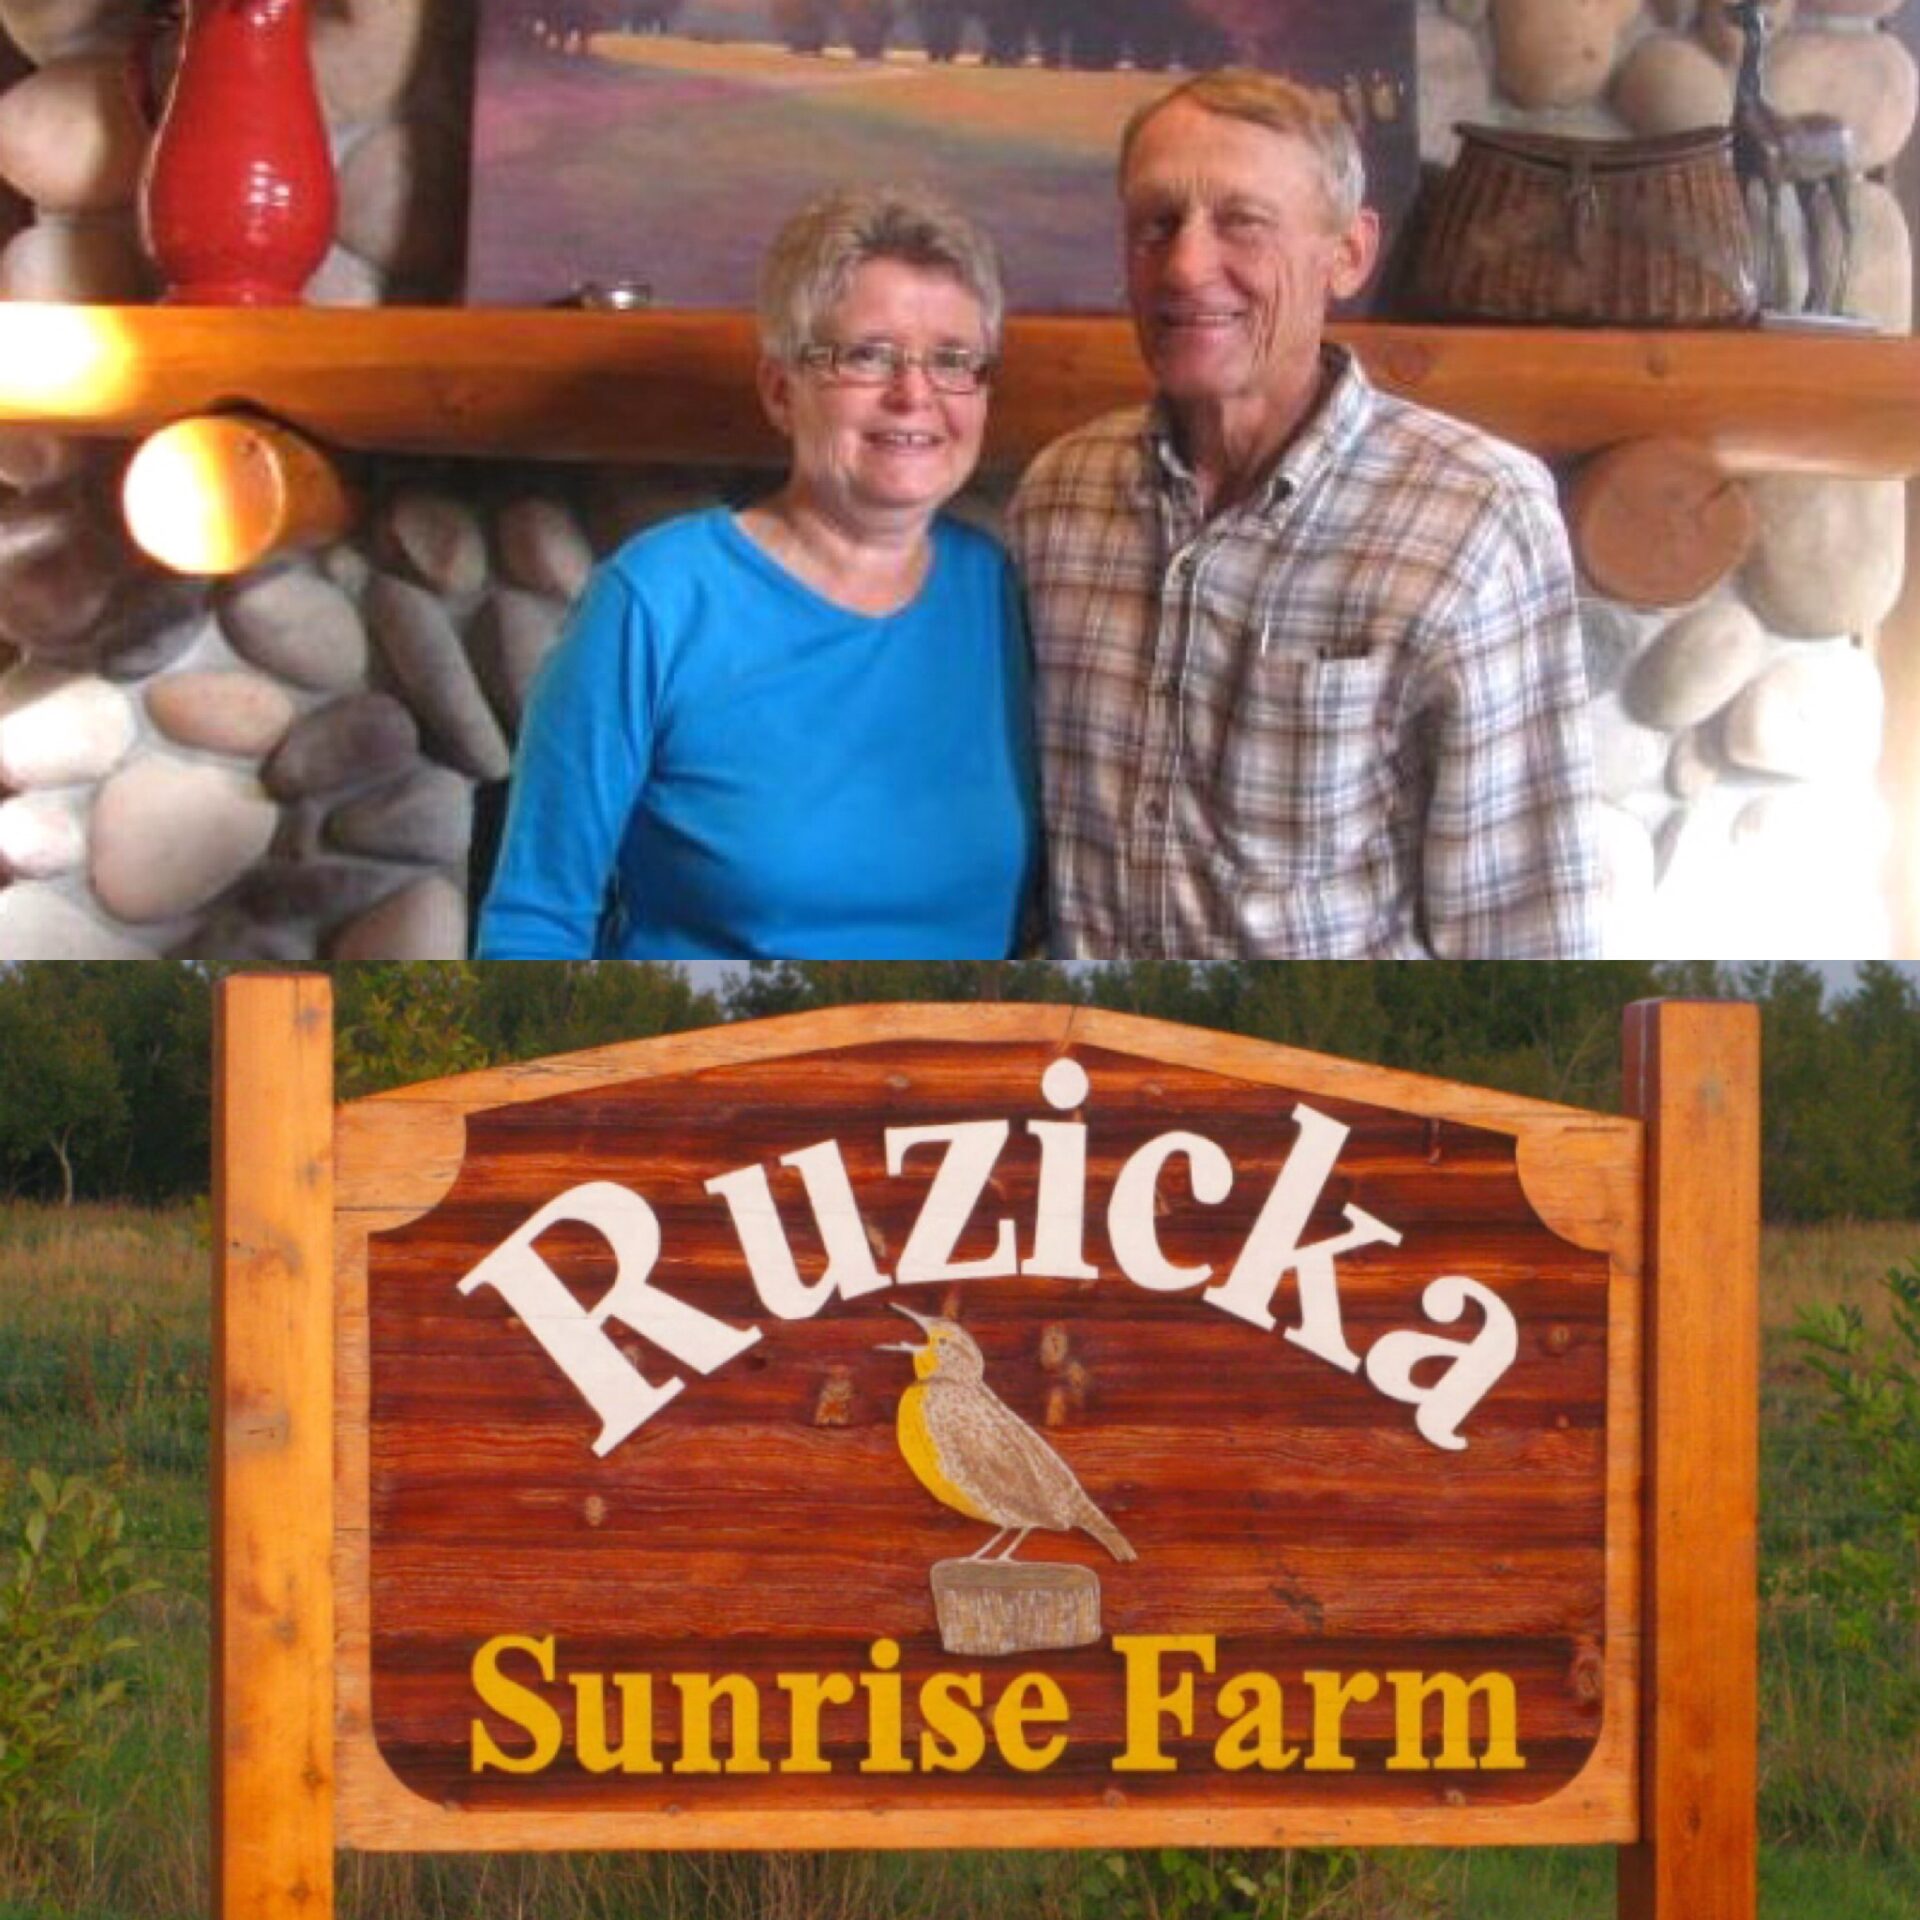 Congratulations to ALUS Flagstaff participants Marie and Don Ruzicka for earning a 2018 OTIS Award for “Leading By Example” on Sunrise Farm. They have restored native grasslands, enhanced wetlands, and planted buffer areas to trigger a resurgence of biodiversity on their land, and have worked on many educational initiatives to connect youth to the land and to farming.